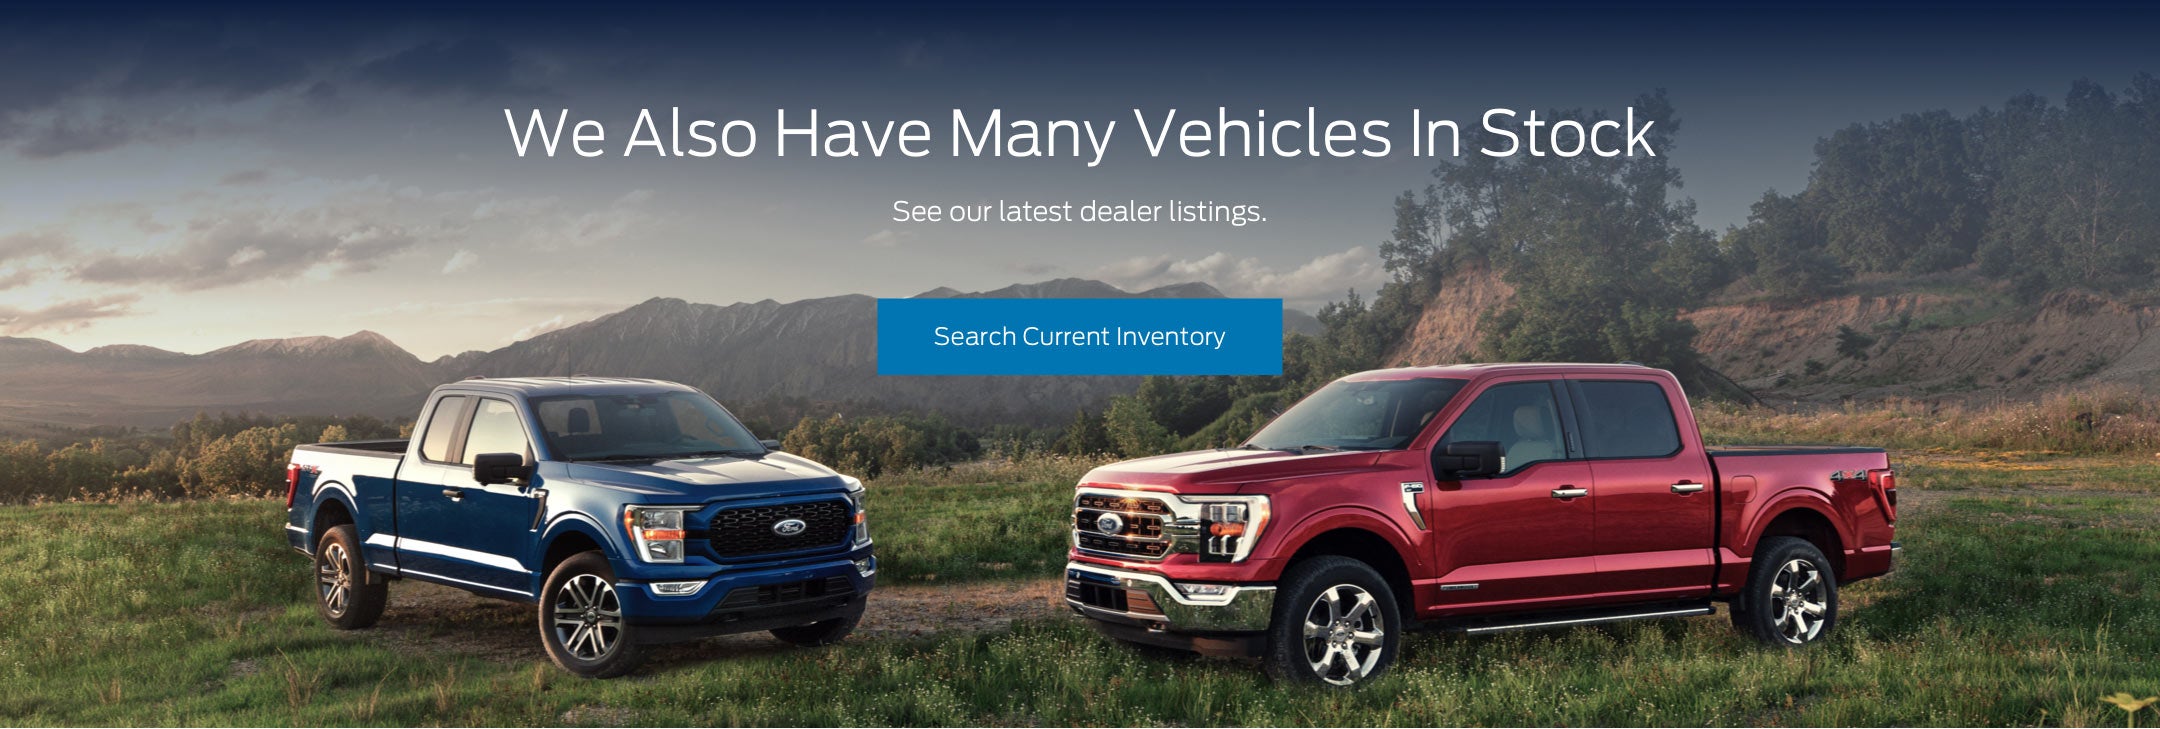 Ford vehicles in stock | Diehl's Ford Sales in Grantsville MD